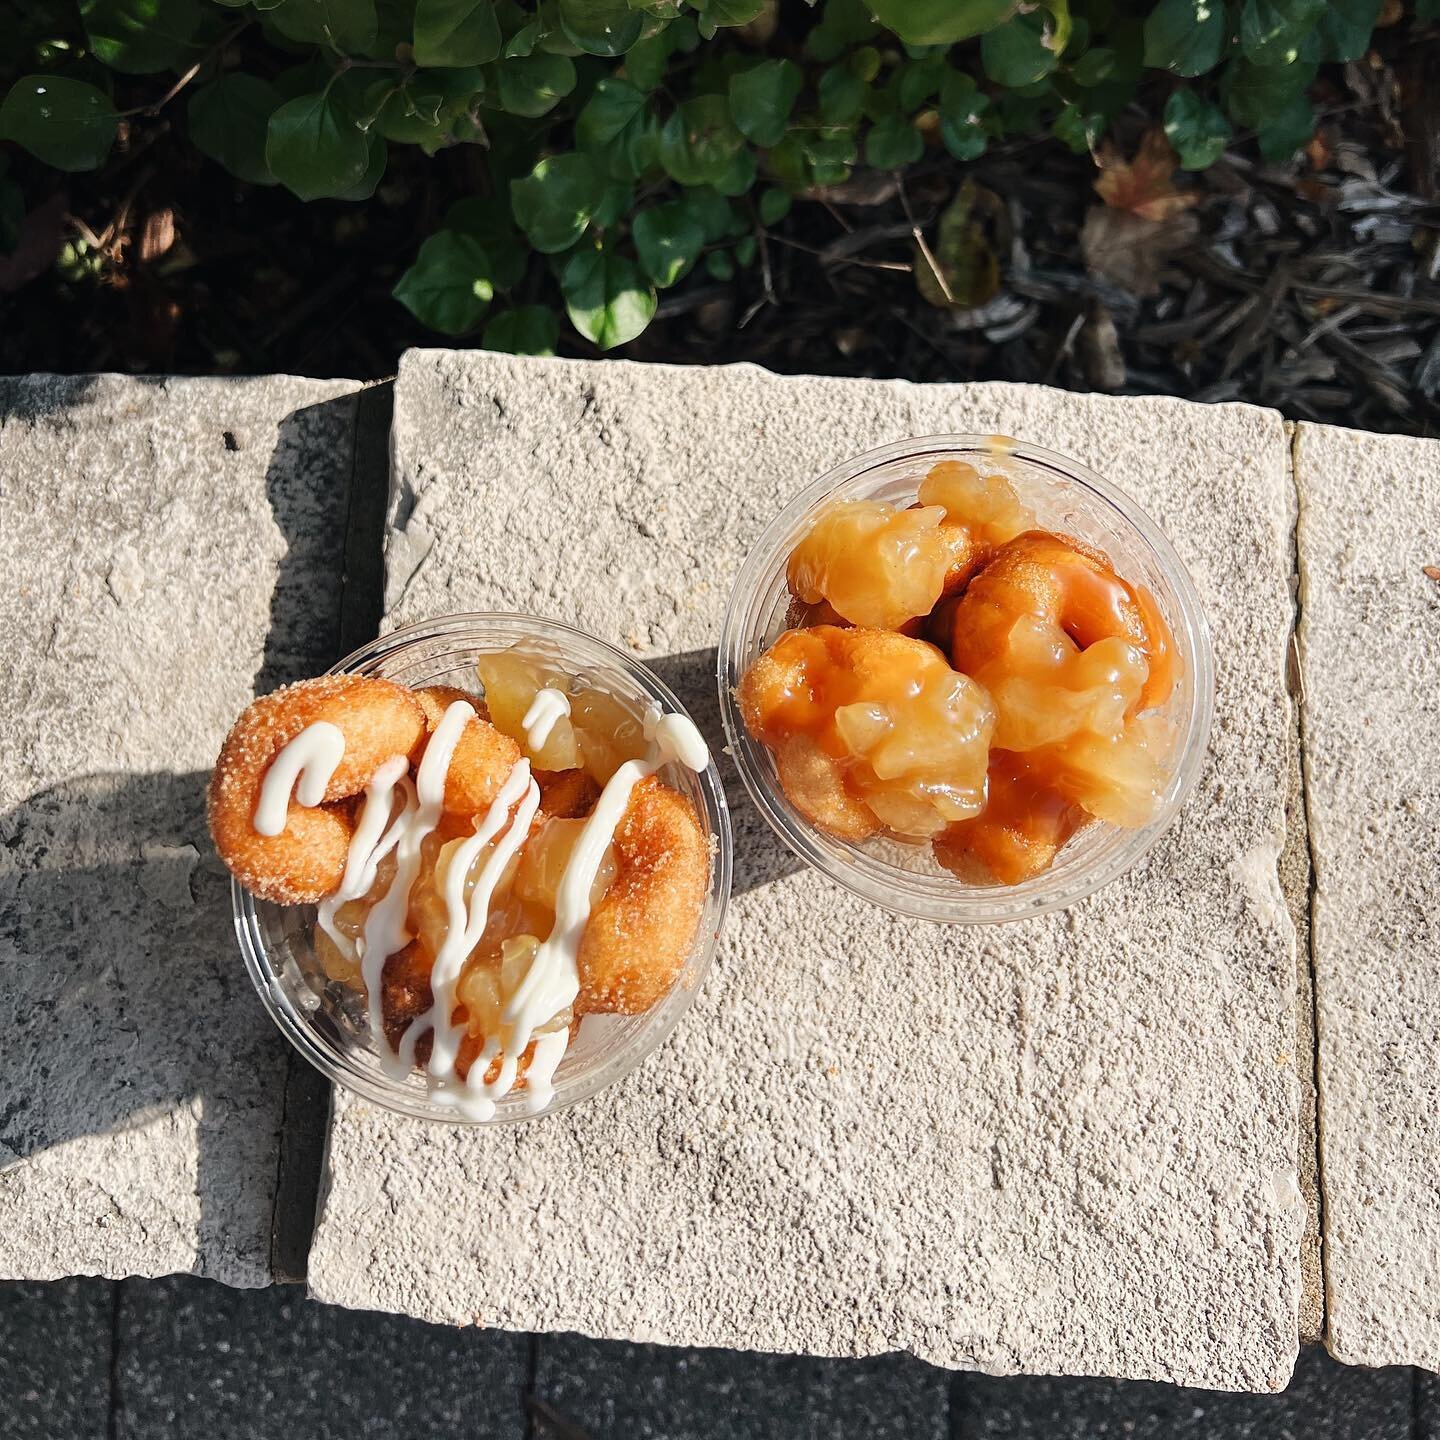 🍎🍎 Happy Johnny Appleseed Day!!! Our FAVORITE day of the year! 🍎🍎

We&rsquo;re in our usual spot by the gazebo and on top of our apple spice doughnuts (we have these every year for this day only!), we have two special doughnut bowls to celebrate: